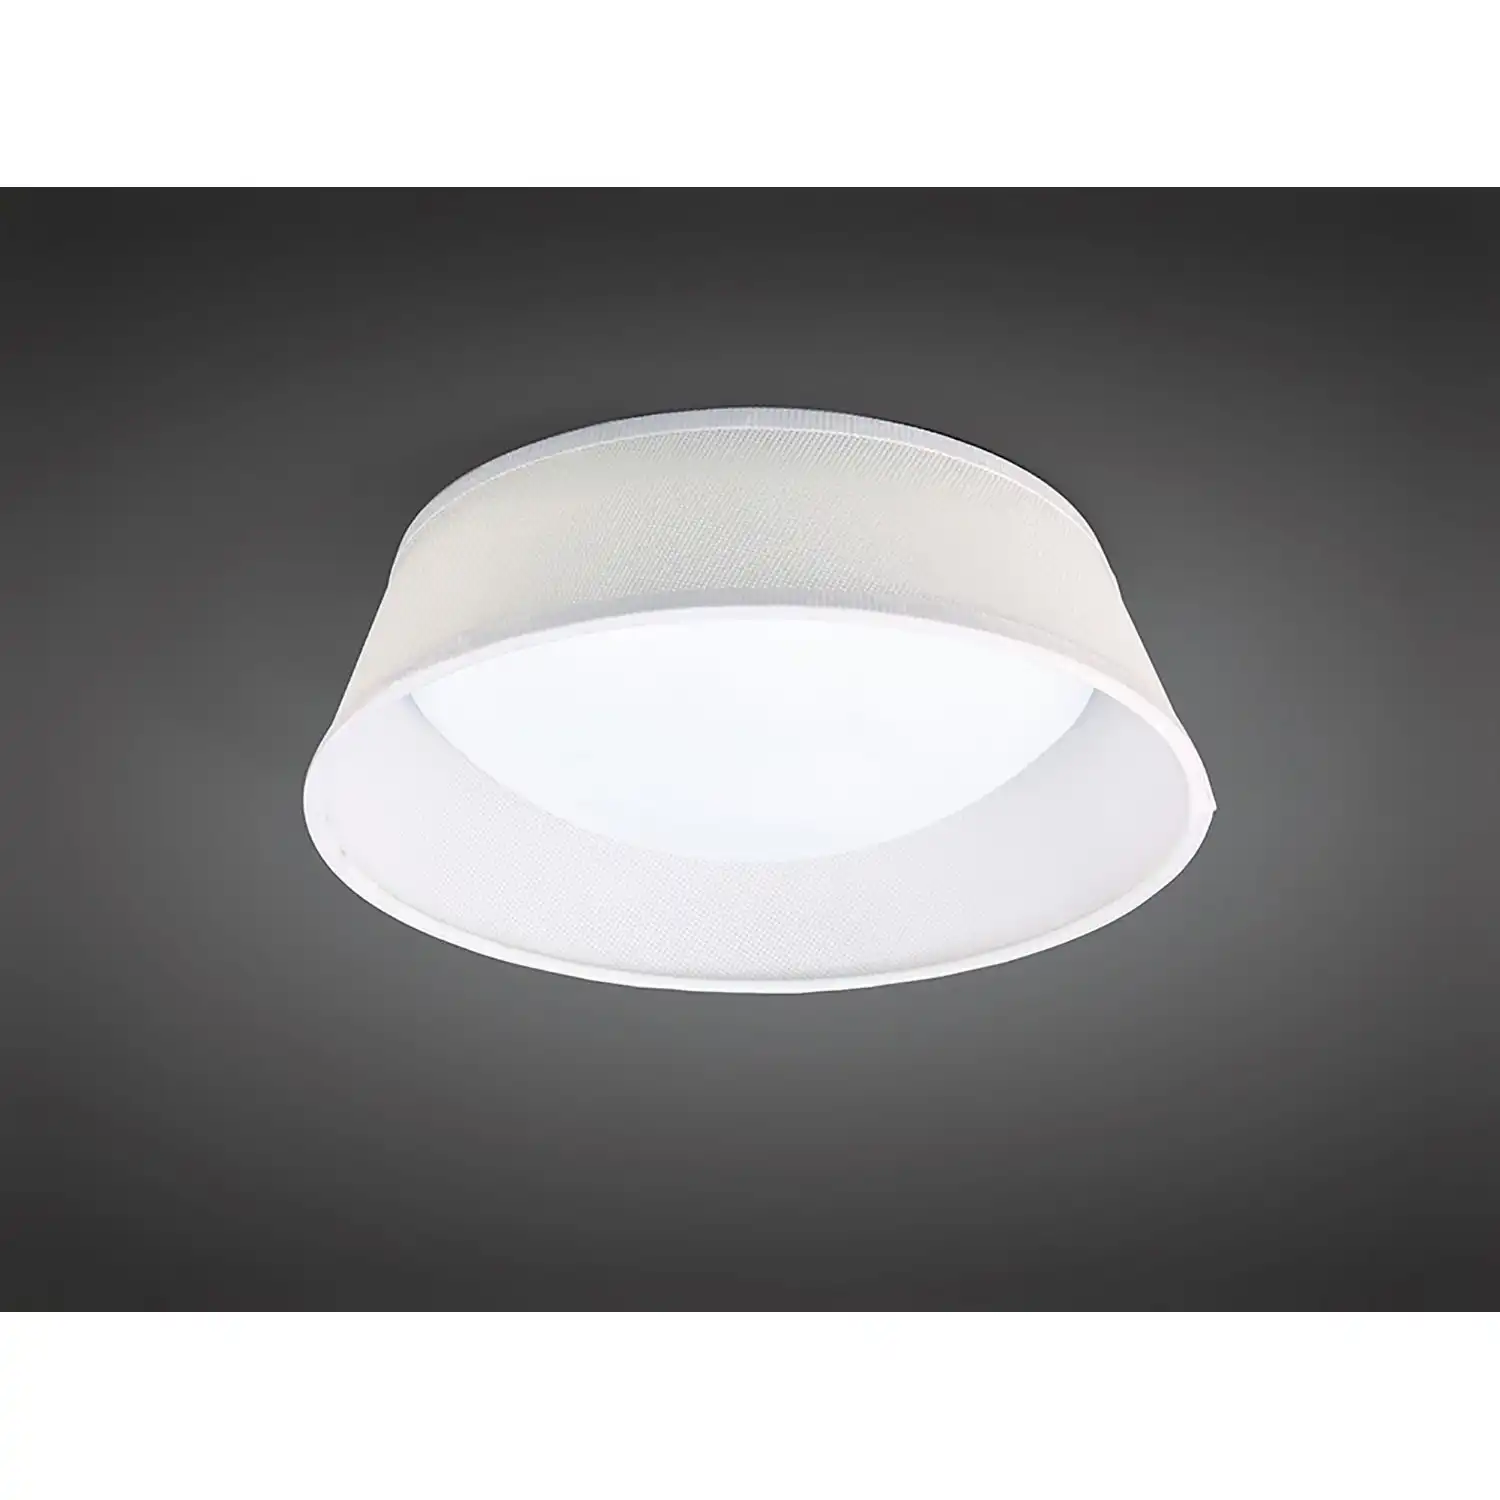 Nordica Flush Ceiling 12W LED 32CM Off White 3000K, 120lm, White Acrylic With Ivory White Shade, 3yrs Warranty